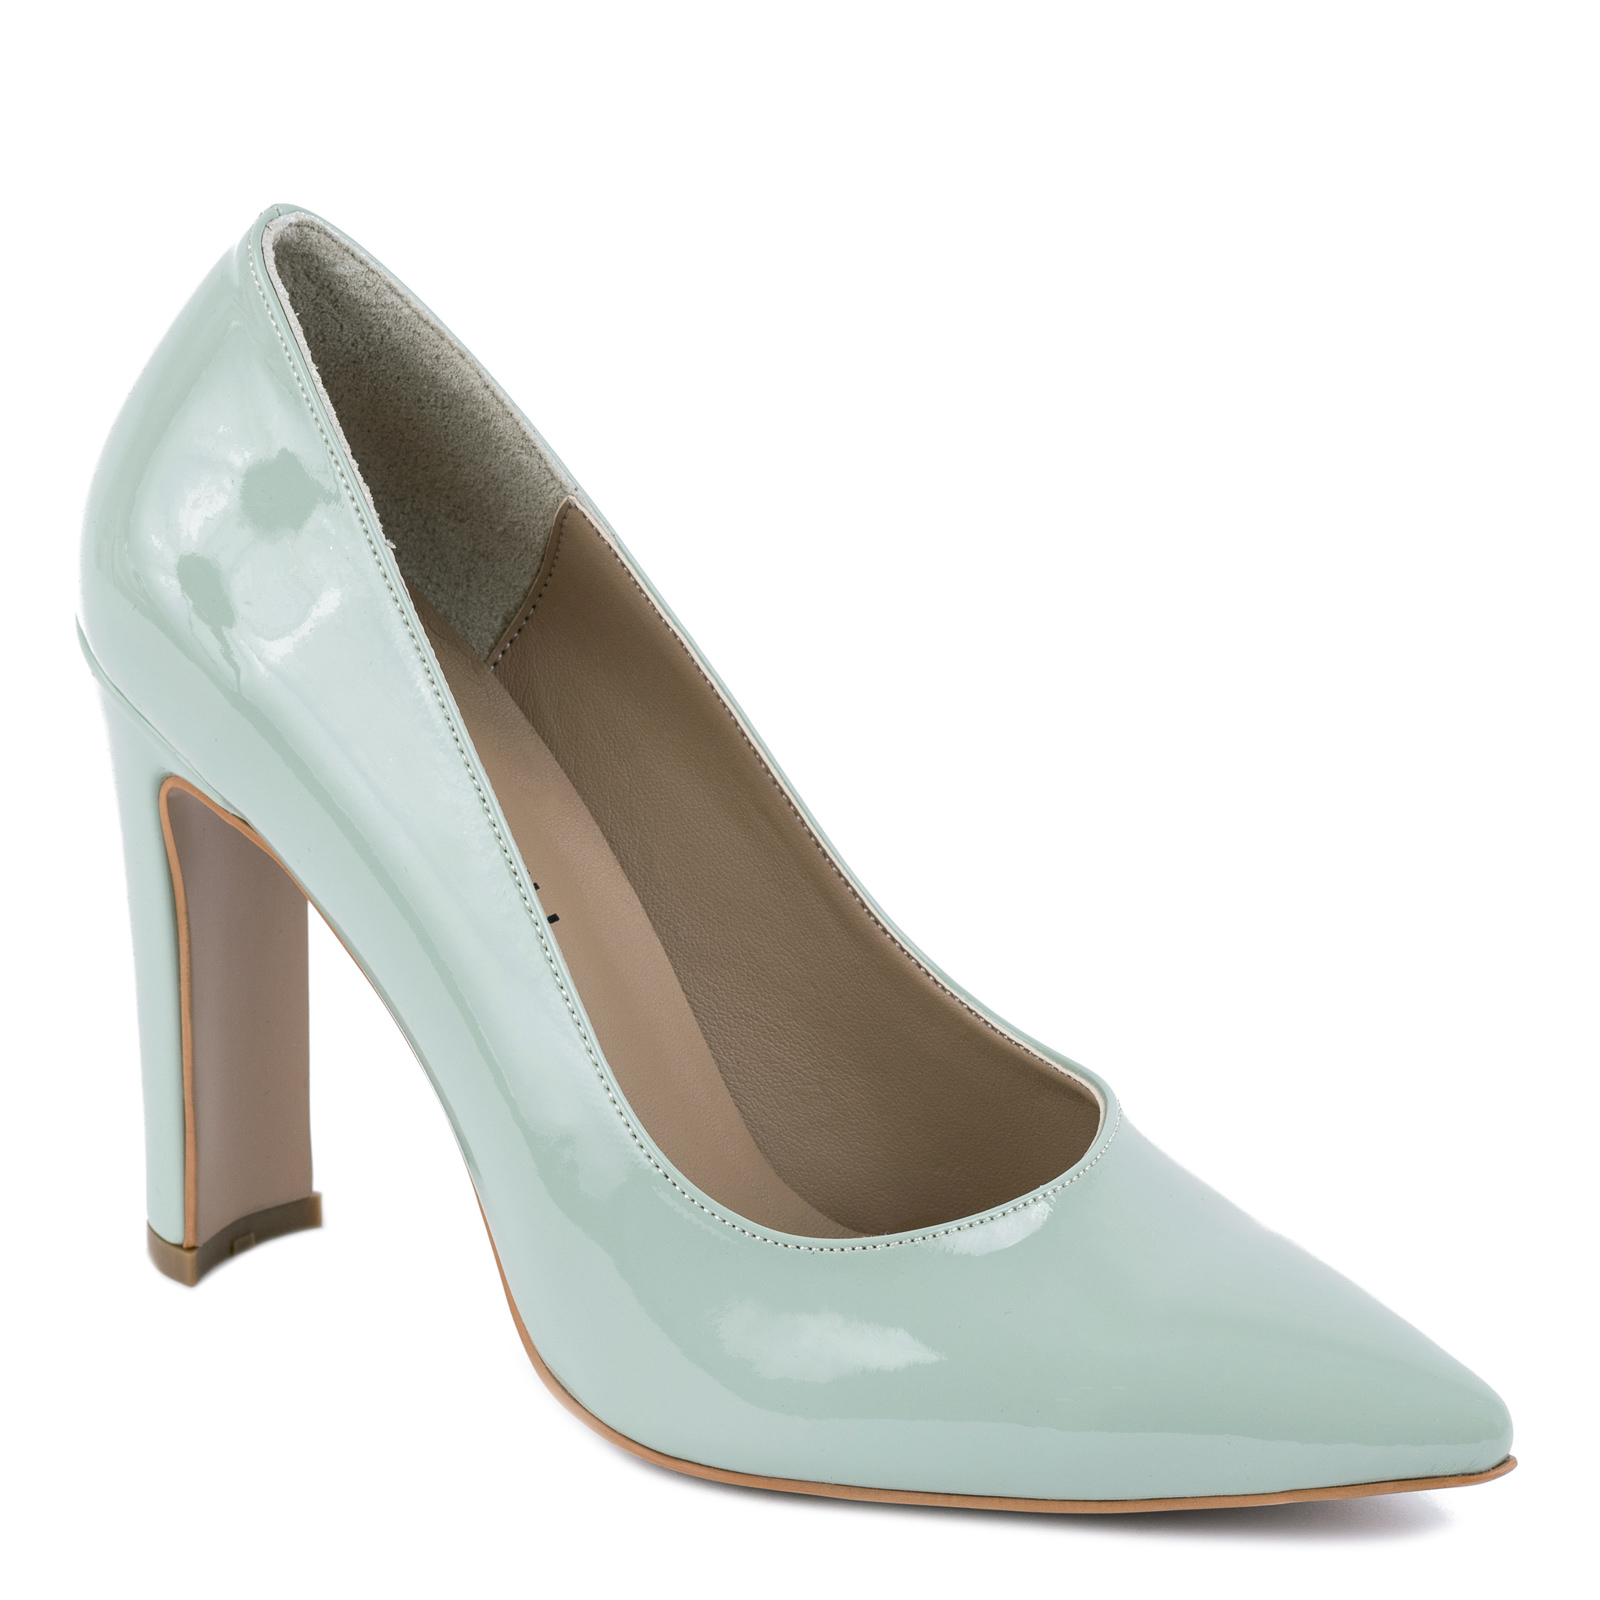 PATENT POINTED STILLETO SHOES WITH THIN HEEL - MINT